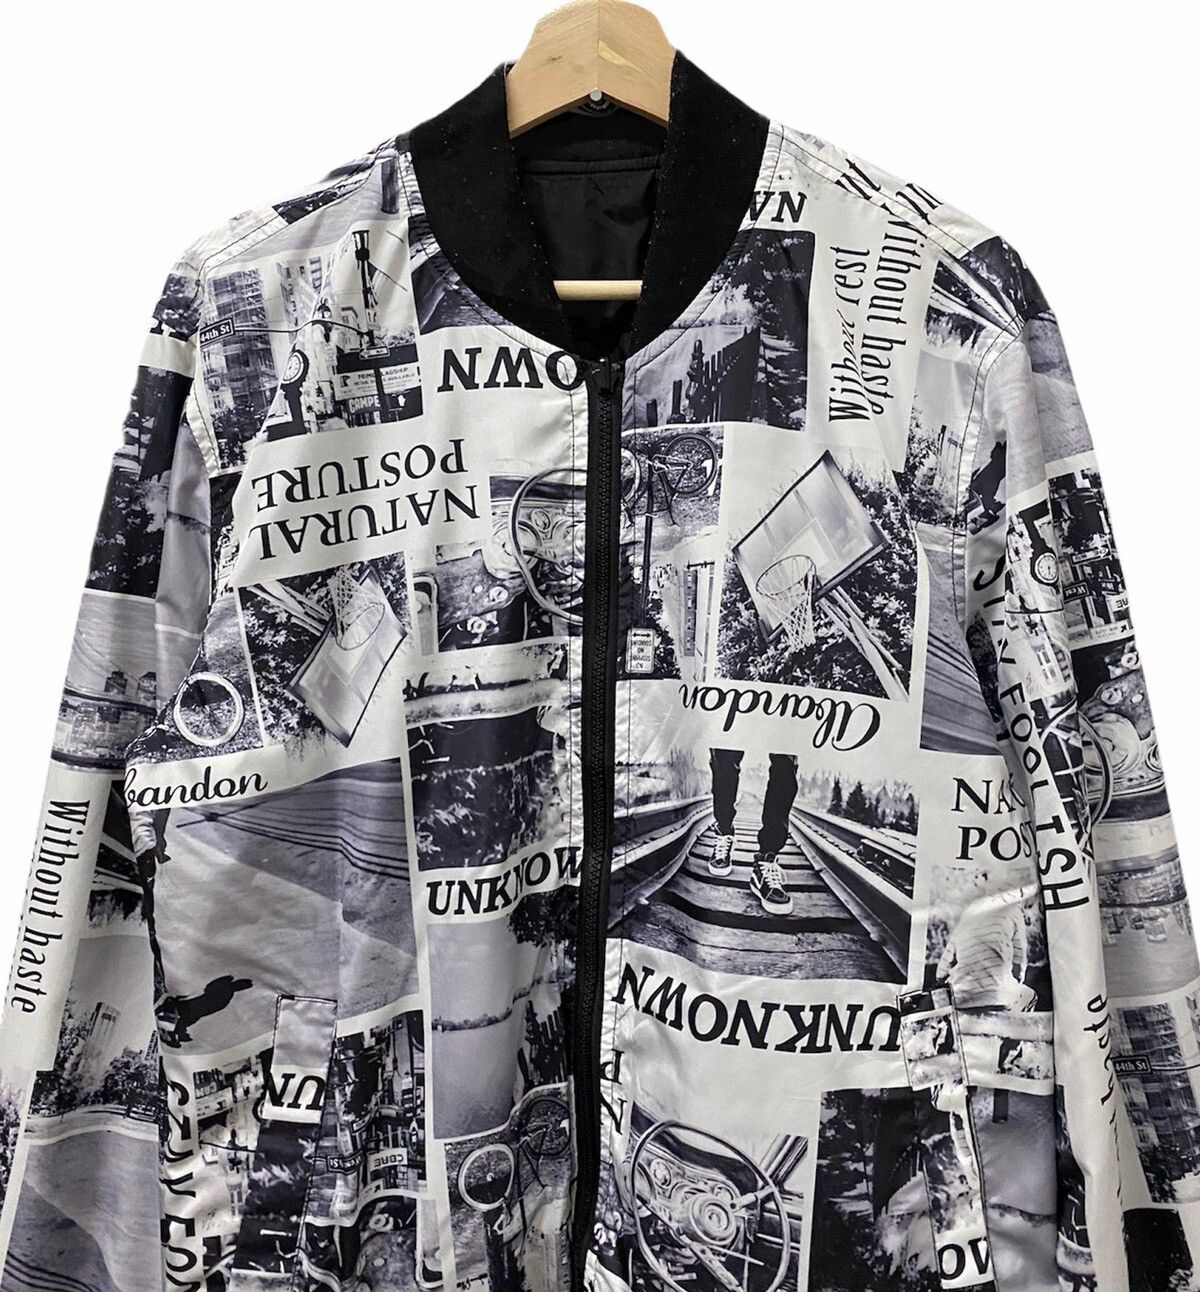 Archival Clothing - SUGGESTION🇯🇵NEWSPAPER GRAPHICS BOMBER JACKET LIKE SUPREME - 2